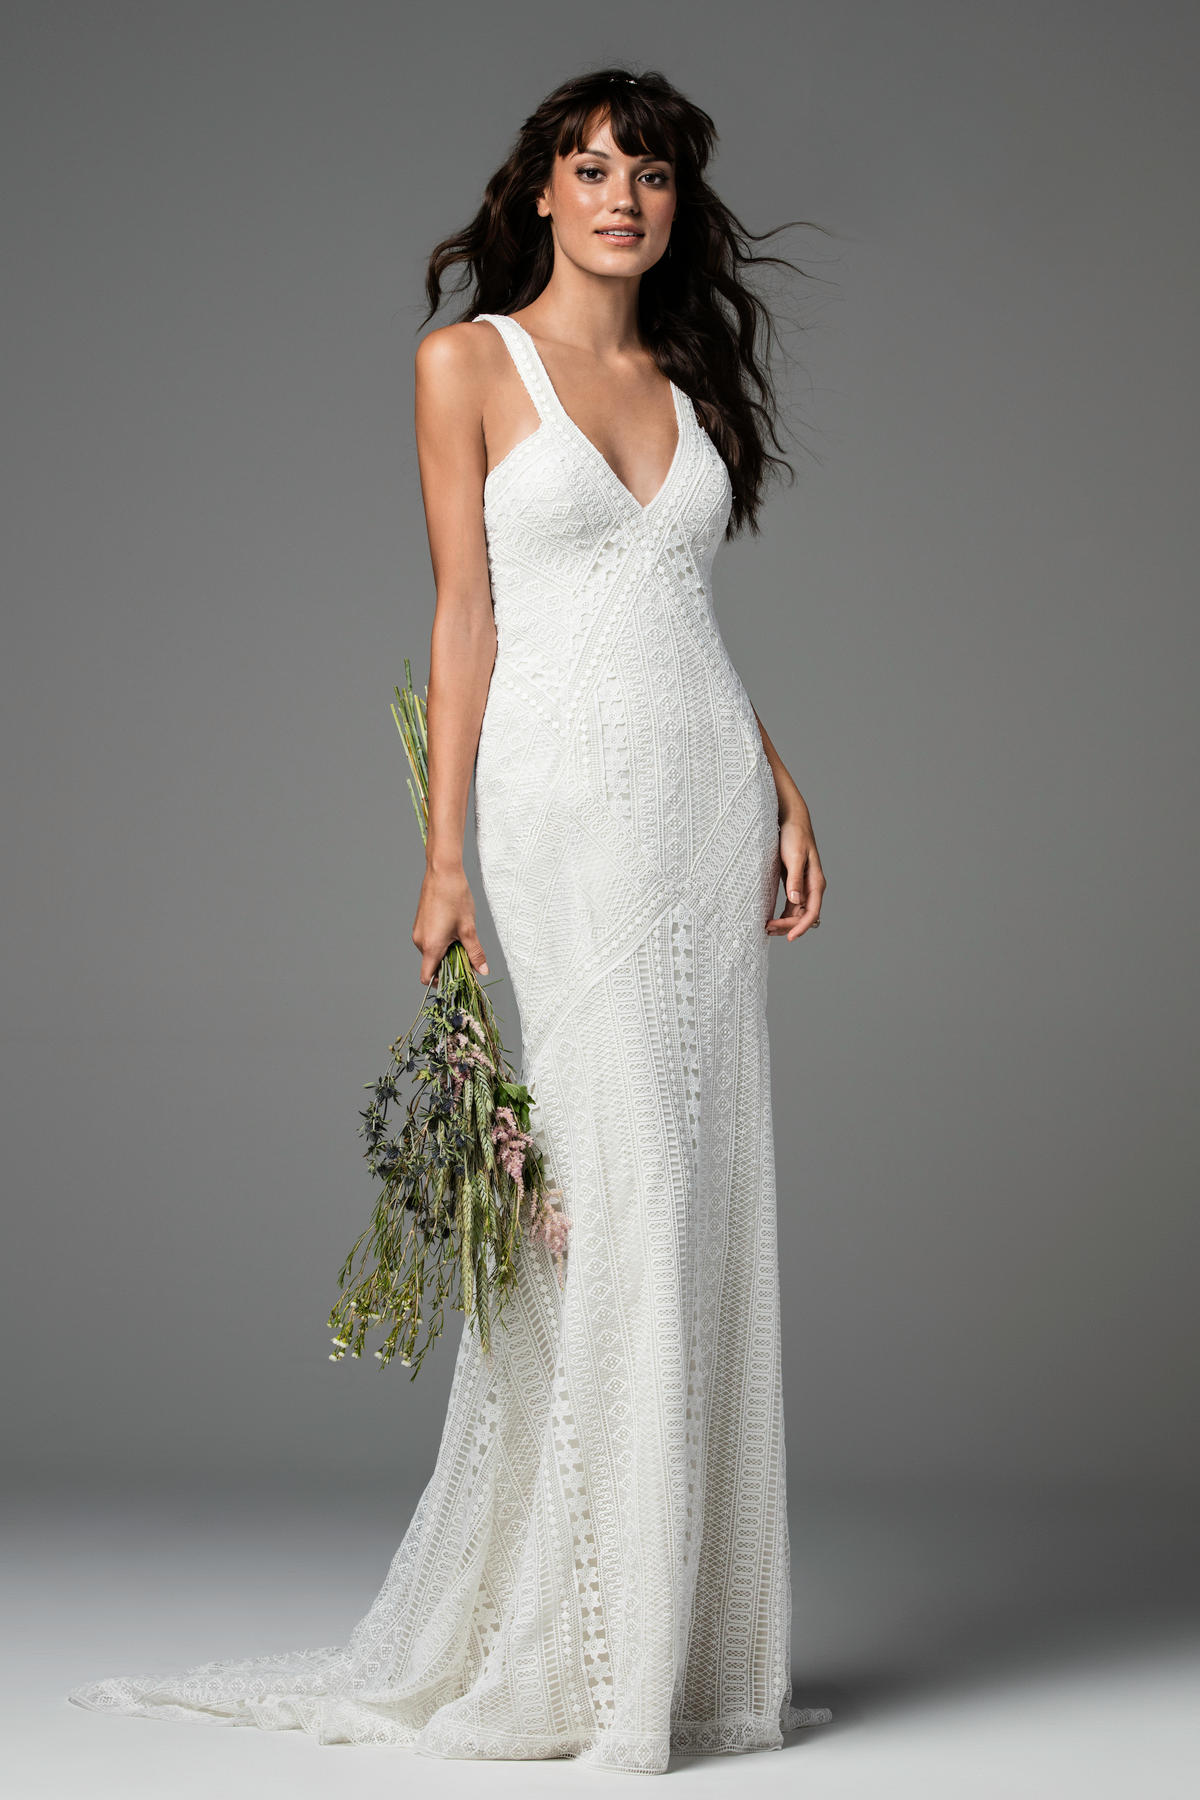 Watters Wedding Dresses & Bridal Gowns In San Diego